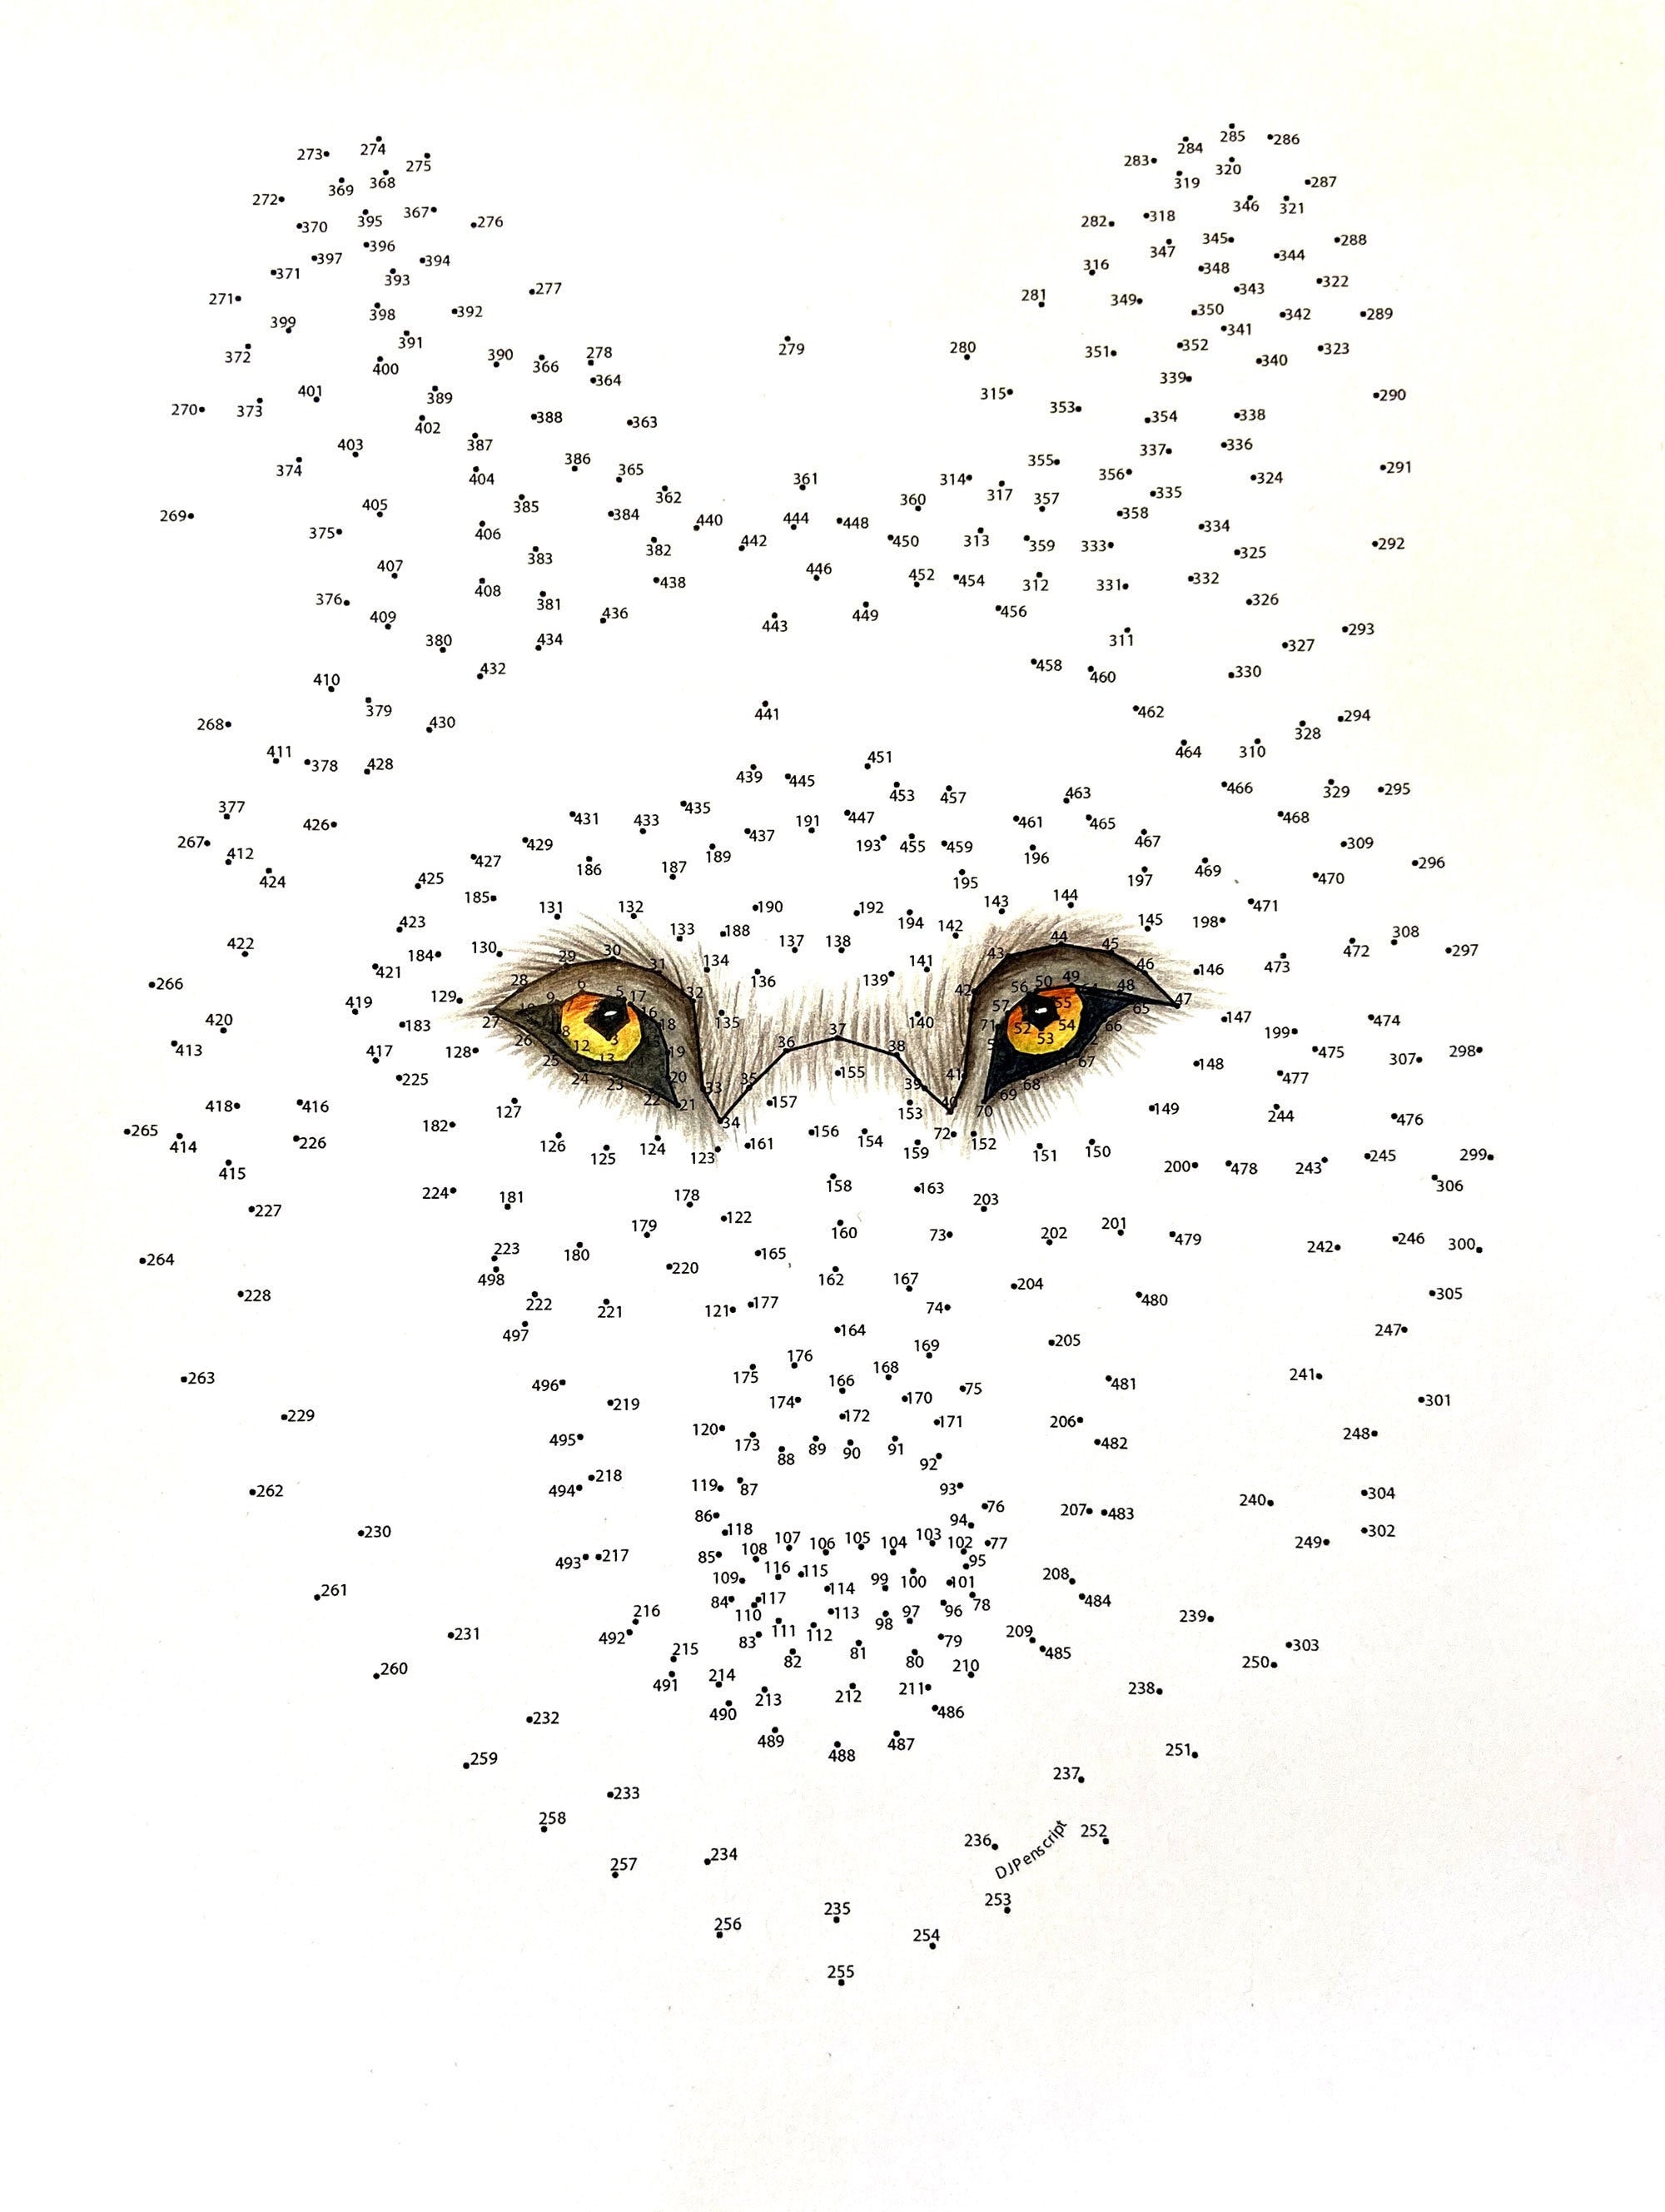 Wolf Extreme Dot to Dot PDF Activity and Coloring Page - Etsy